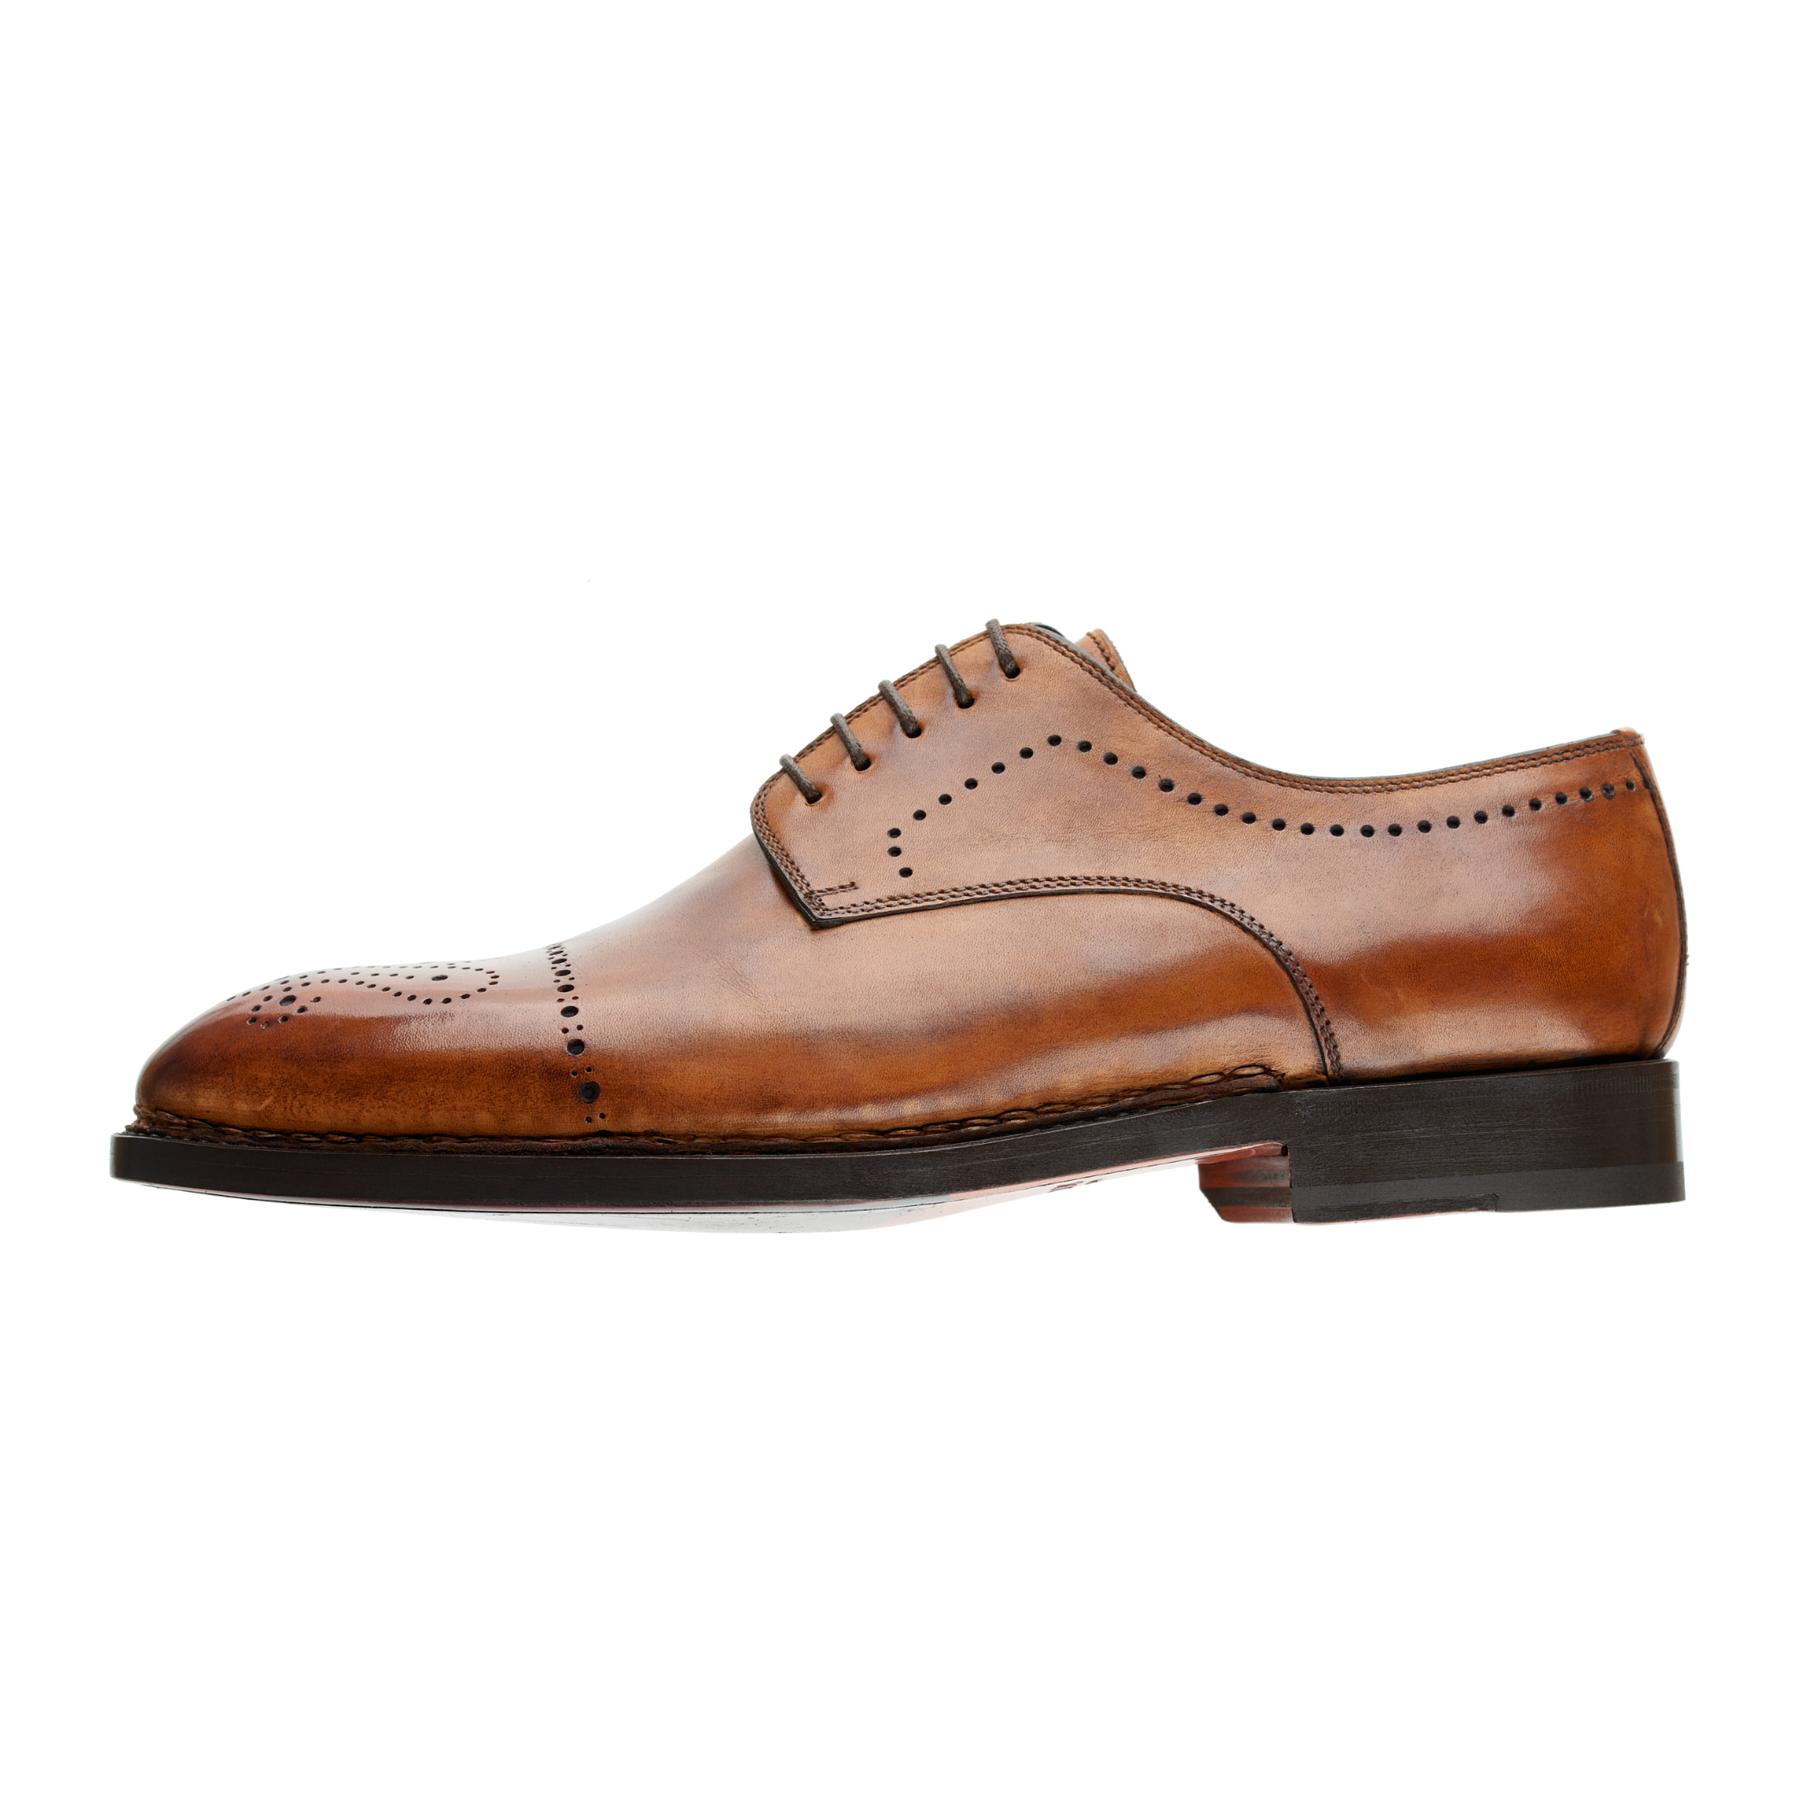 Mens Shoes Slip-on shoes Loafers Brown Bontoni Leather brera Five-eyelet Wholecut Balmoral With Perforated Details And Medallion in Cognac for Men 